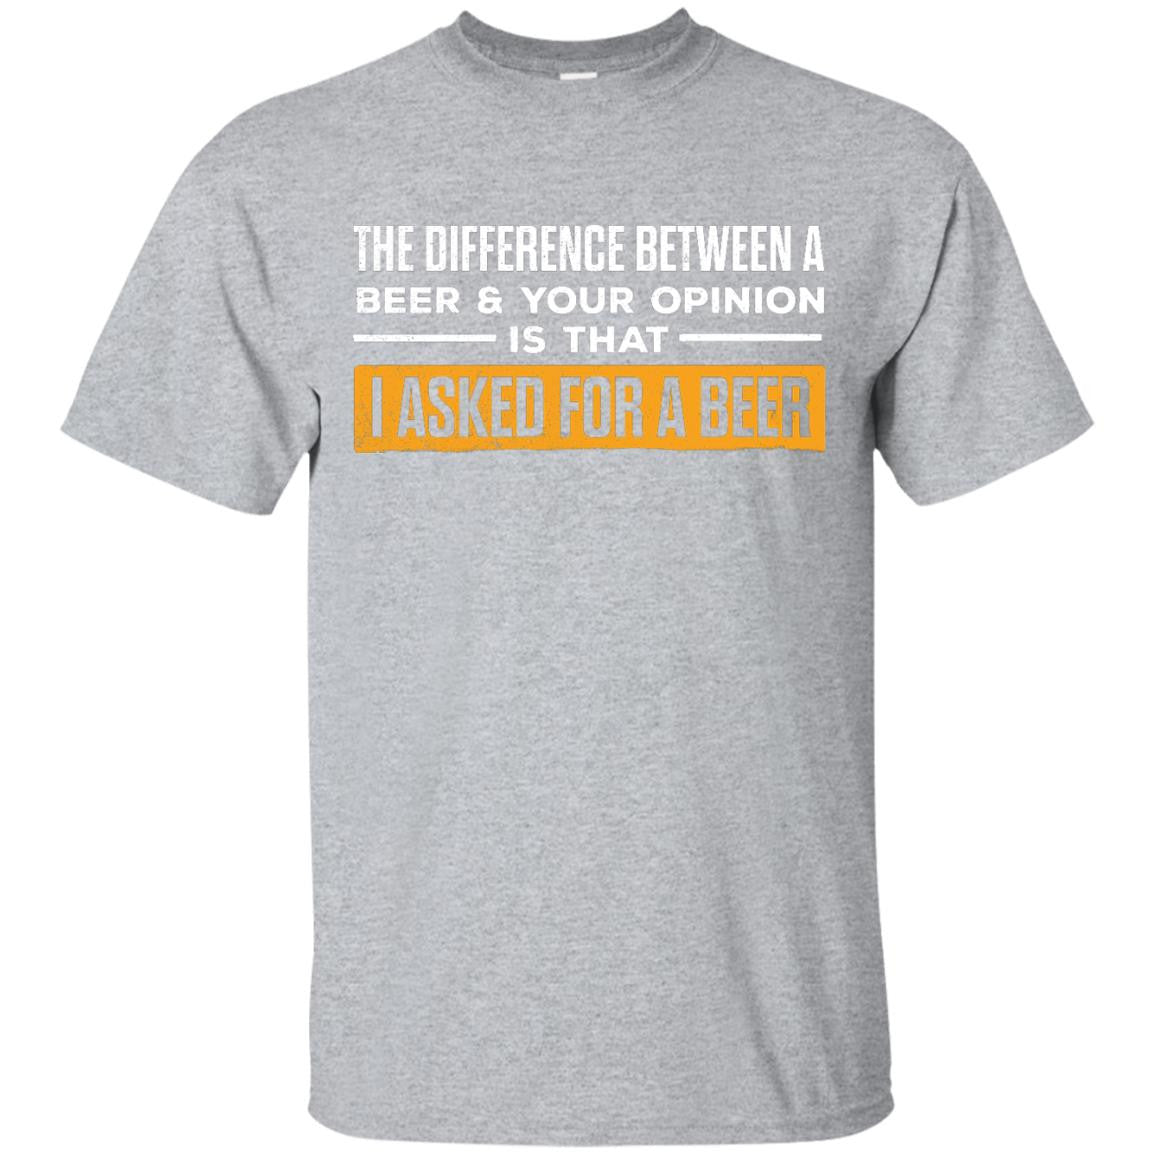 The Difference Between A Beer & Your Opinion Is That I Asked For A Beer T-Shirt Apparel - The Beer Lodge